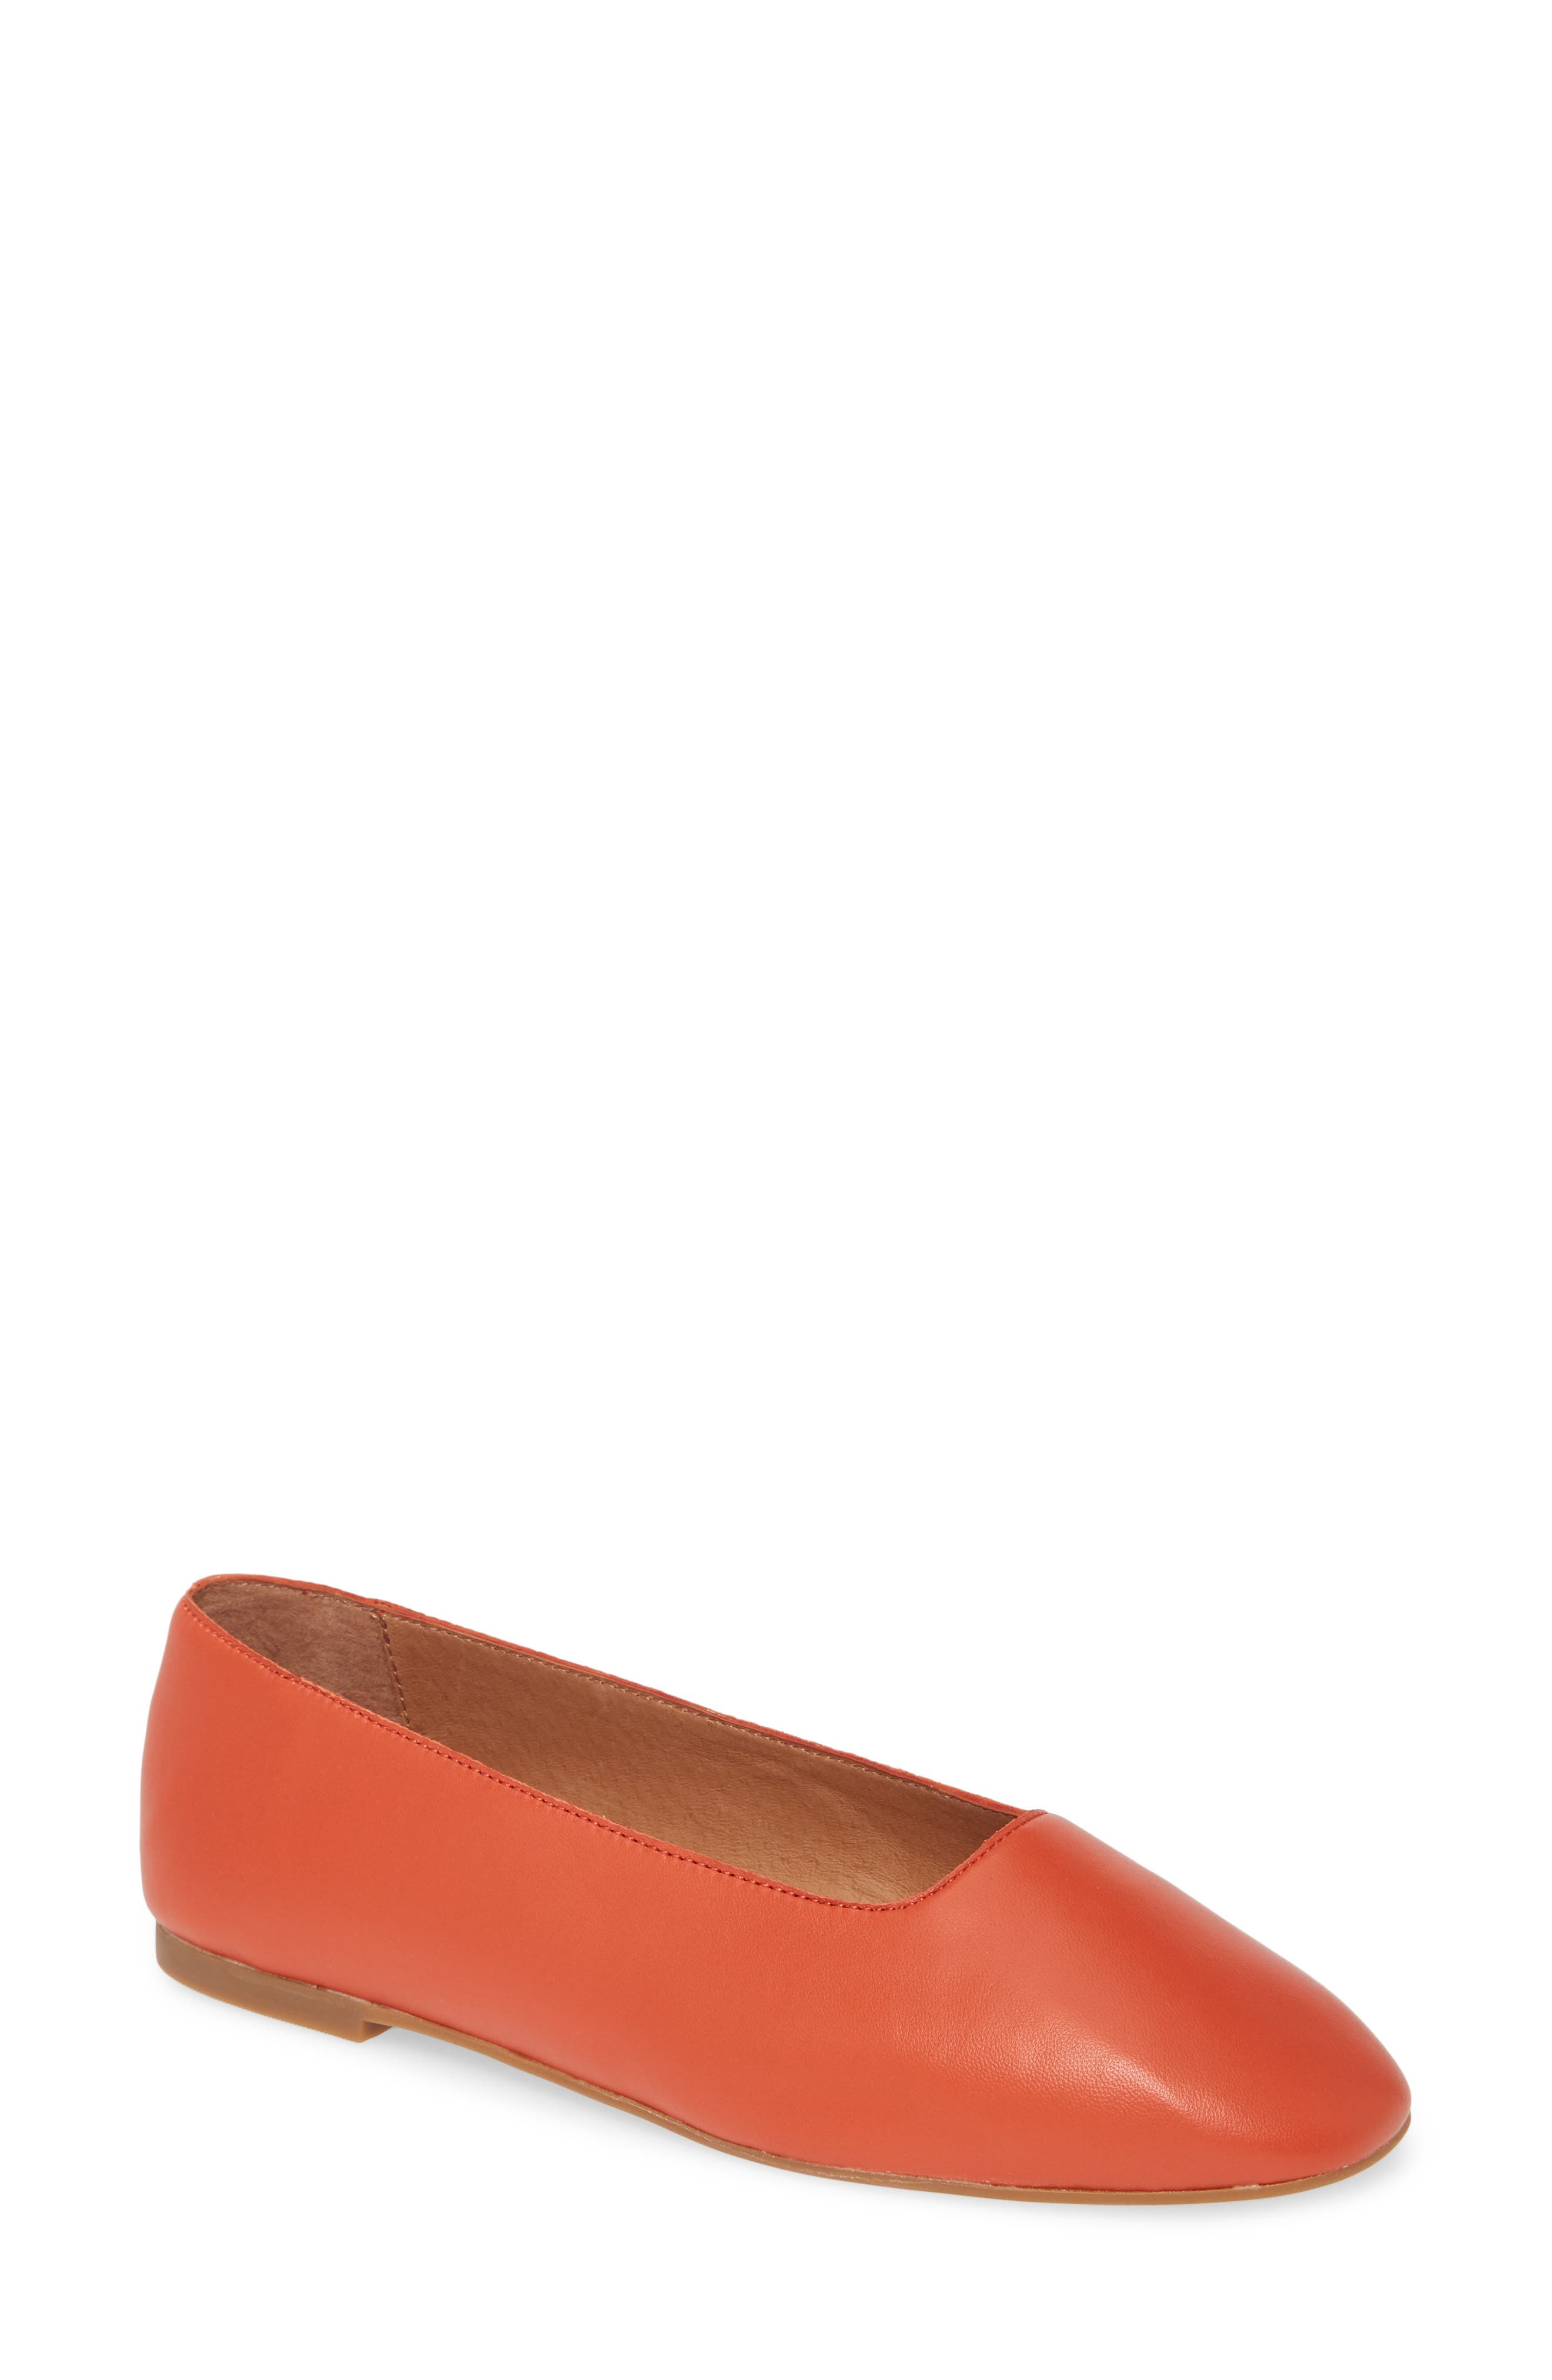 madewell pointed flats